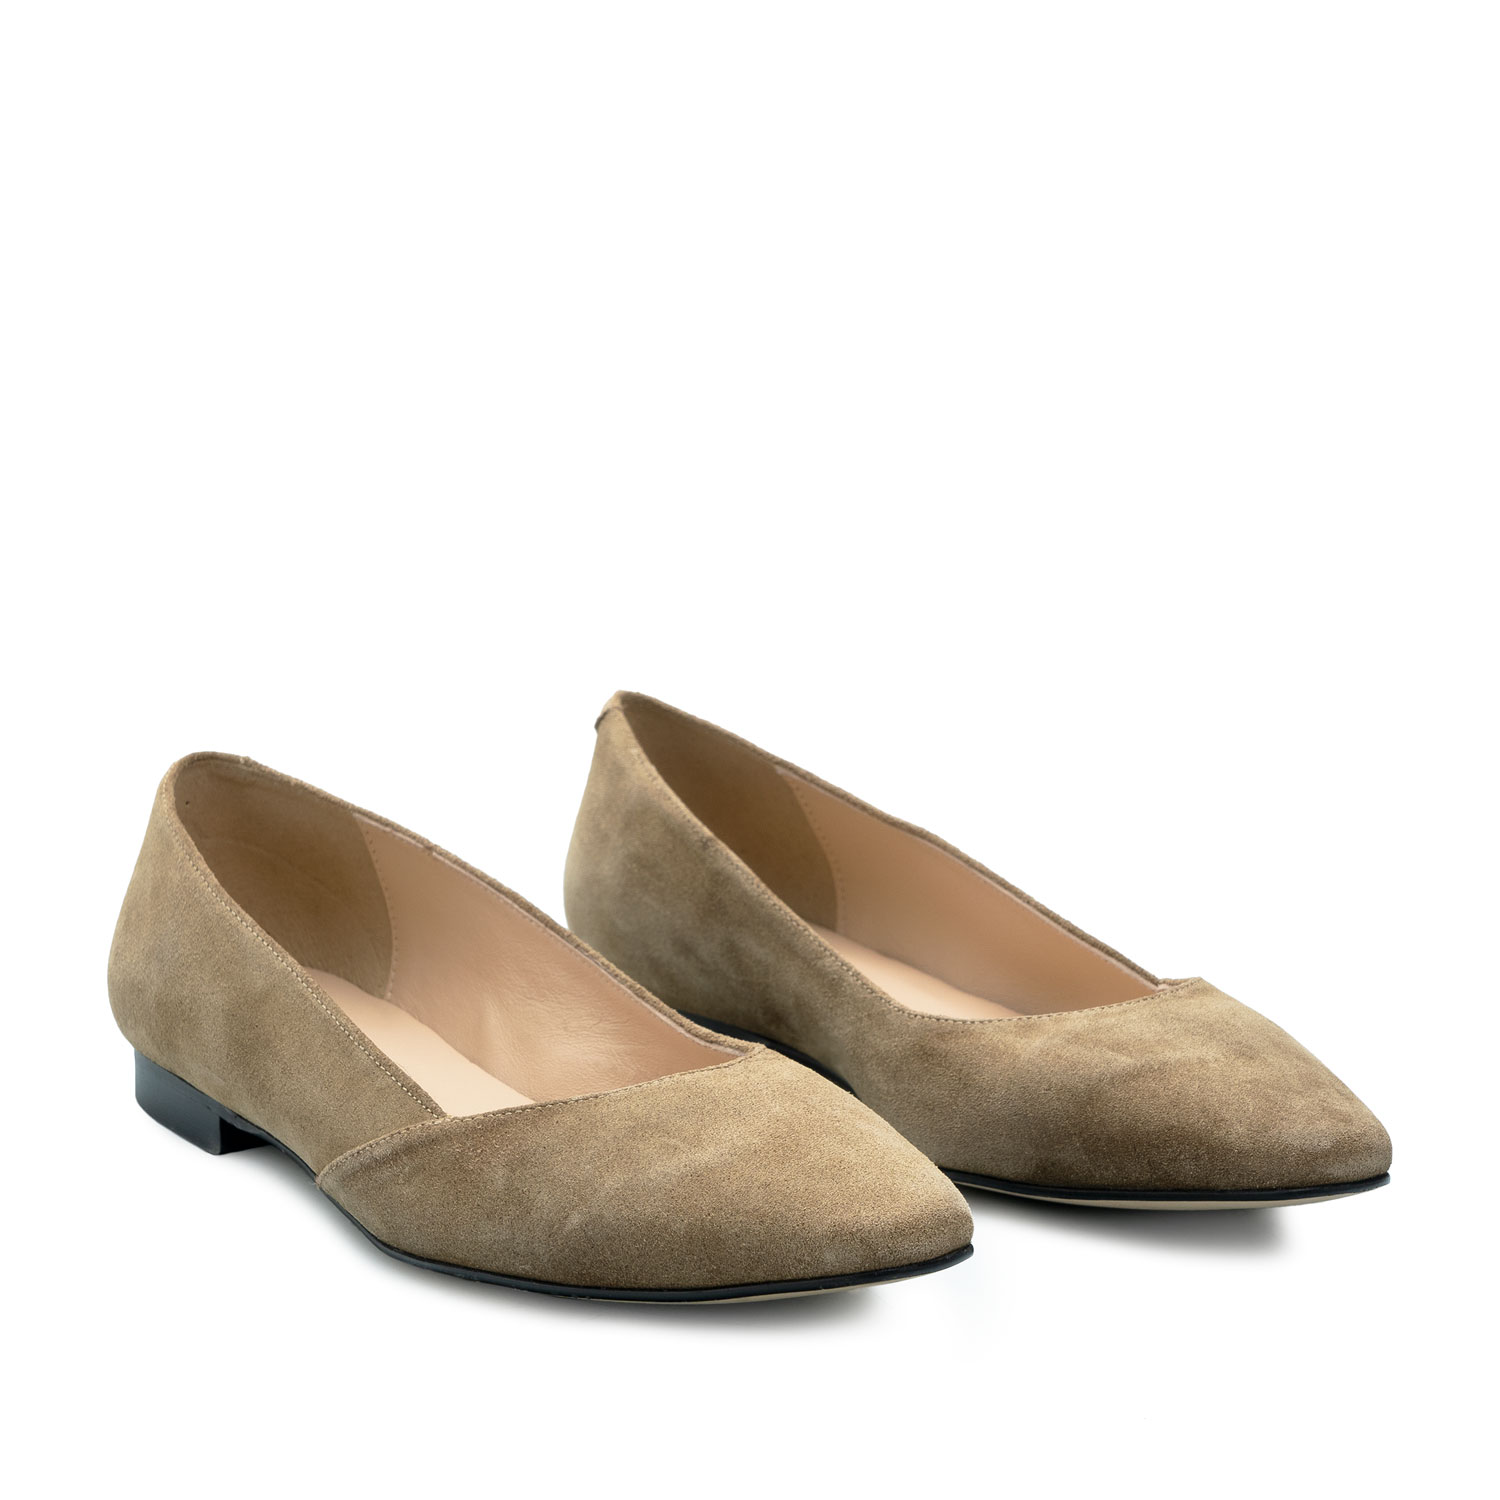 Flat Slip-on Shoes in Taupe Split Leather 